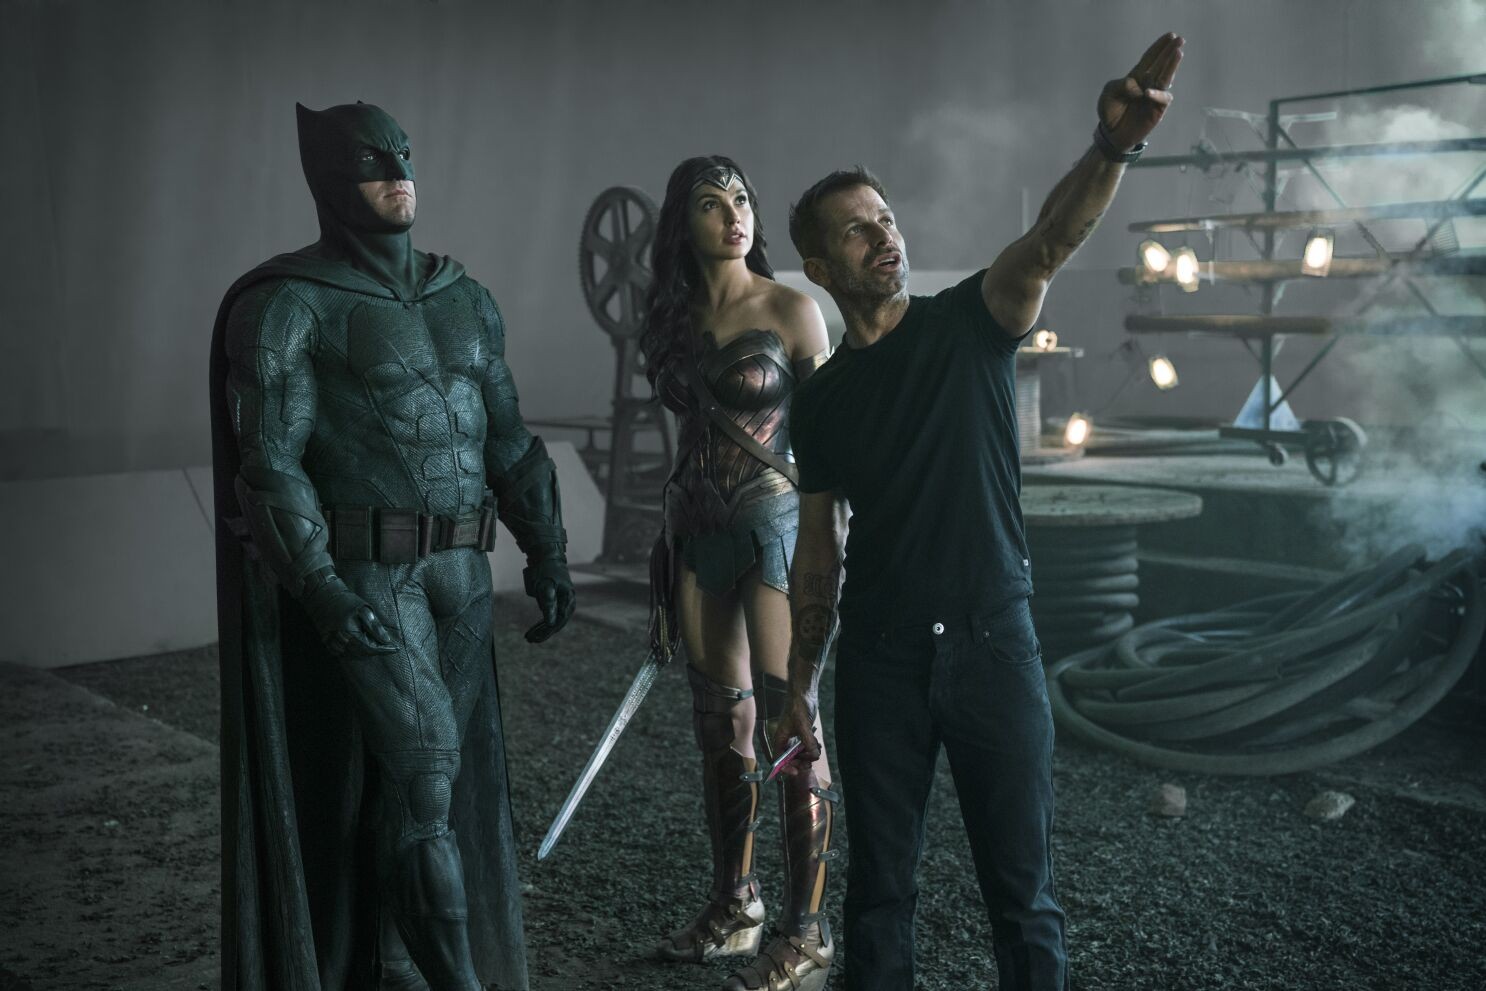 Zack Snyder worked extensively for Justice League.